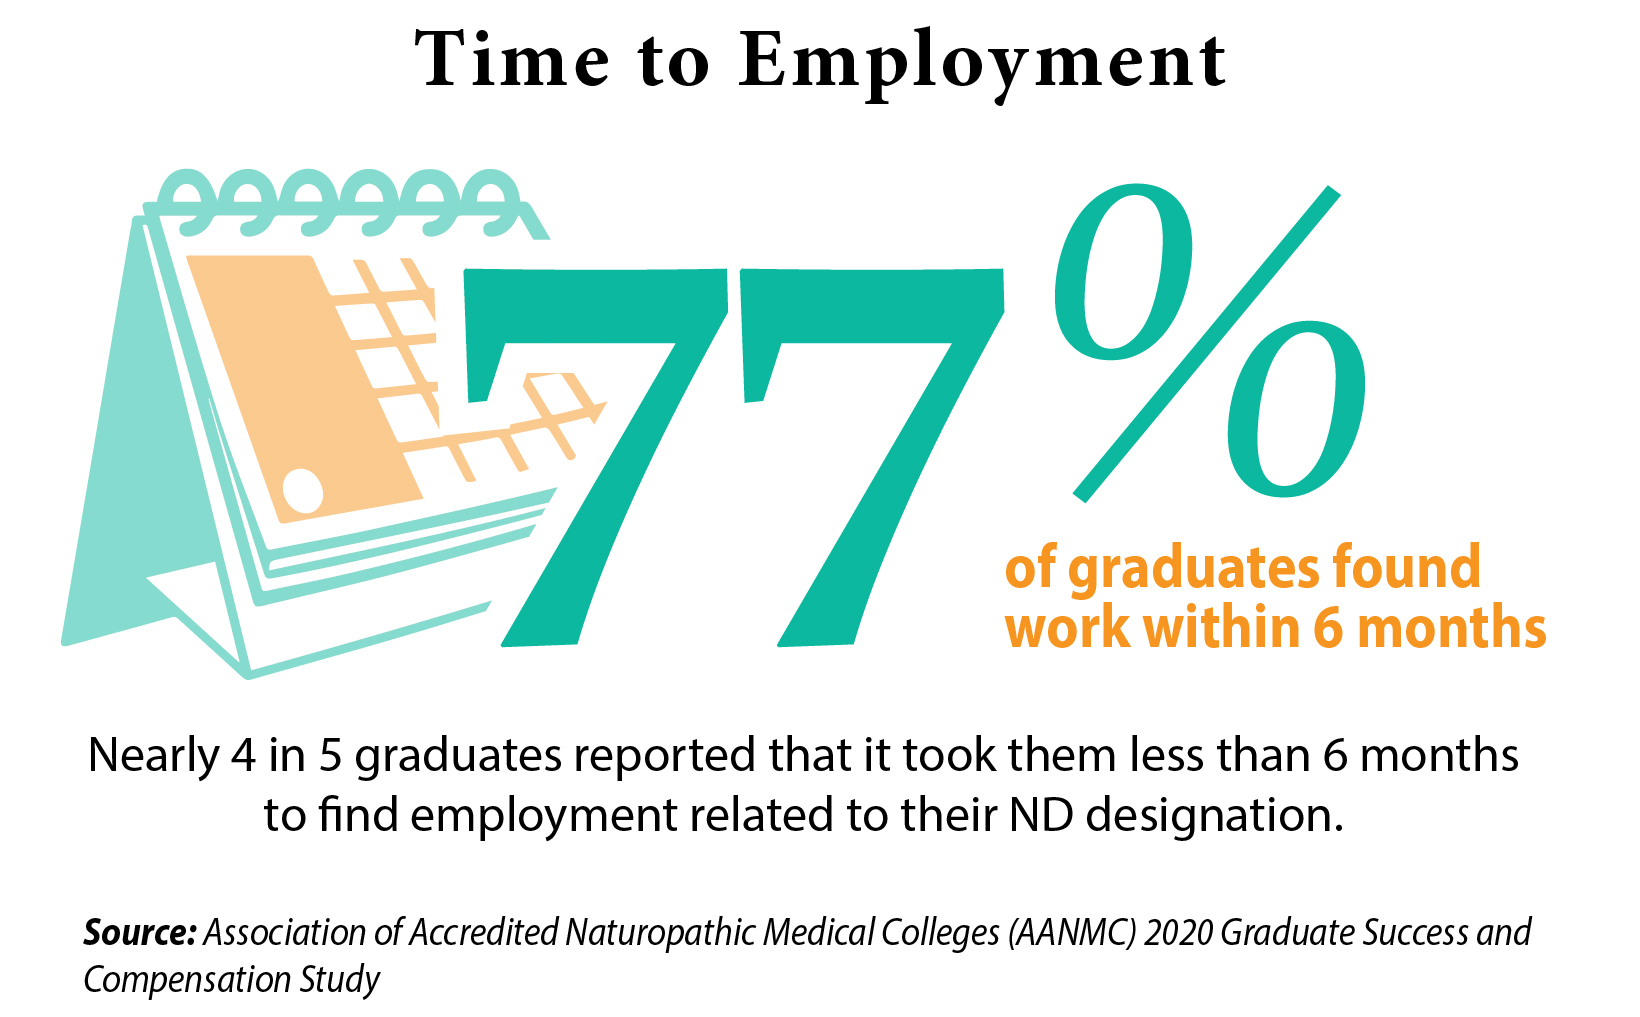 time to employment 77% of graduates found work within 6 months graphic